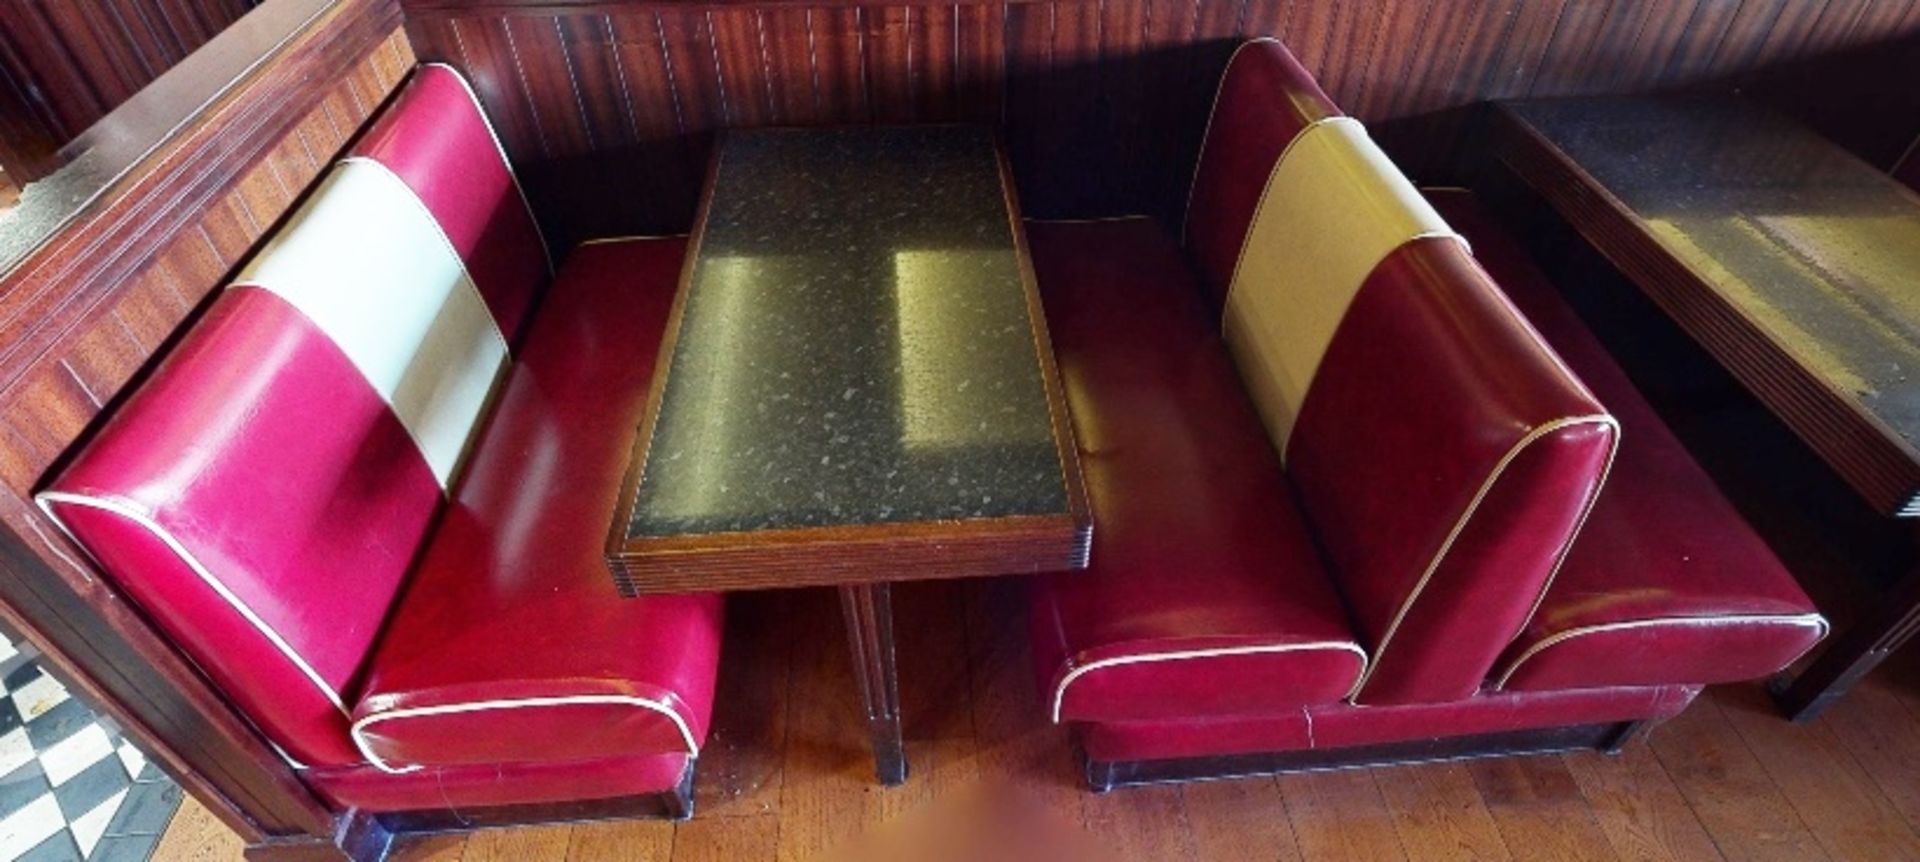 1 x Assorted Lot of Restaurant Seating Benches - Seats 18 Persons - American Diner Style in Red - Image 5 of 11